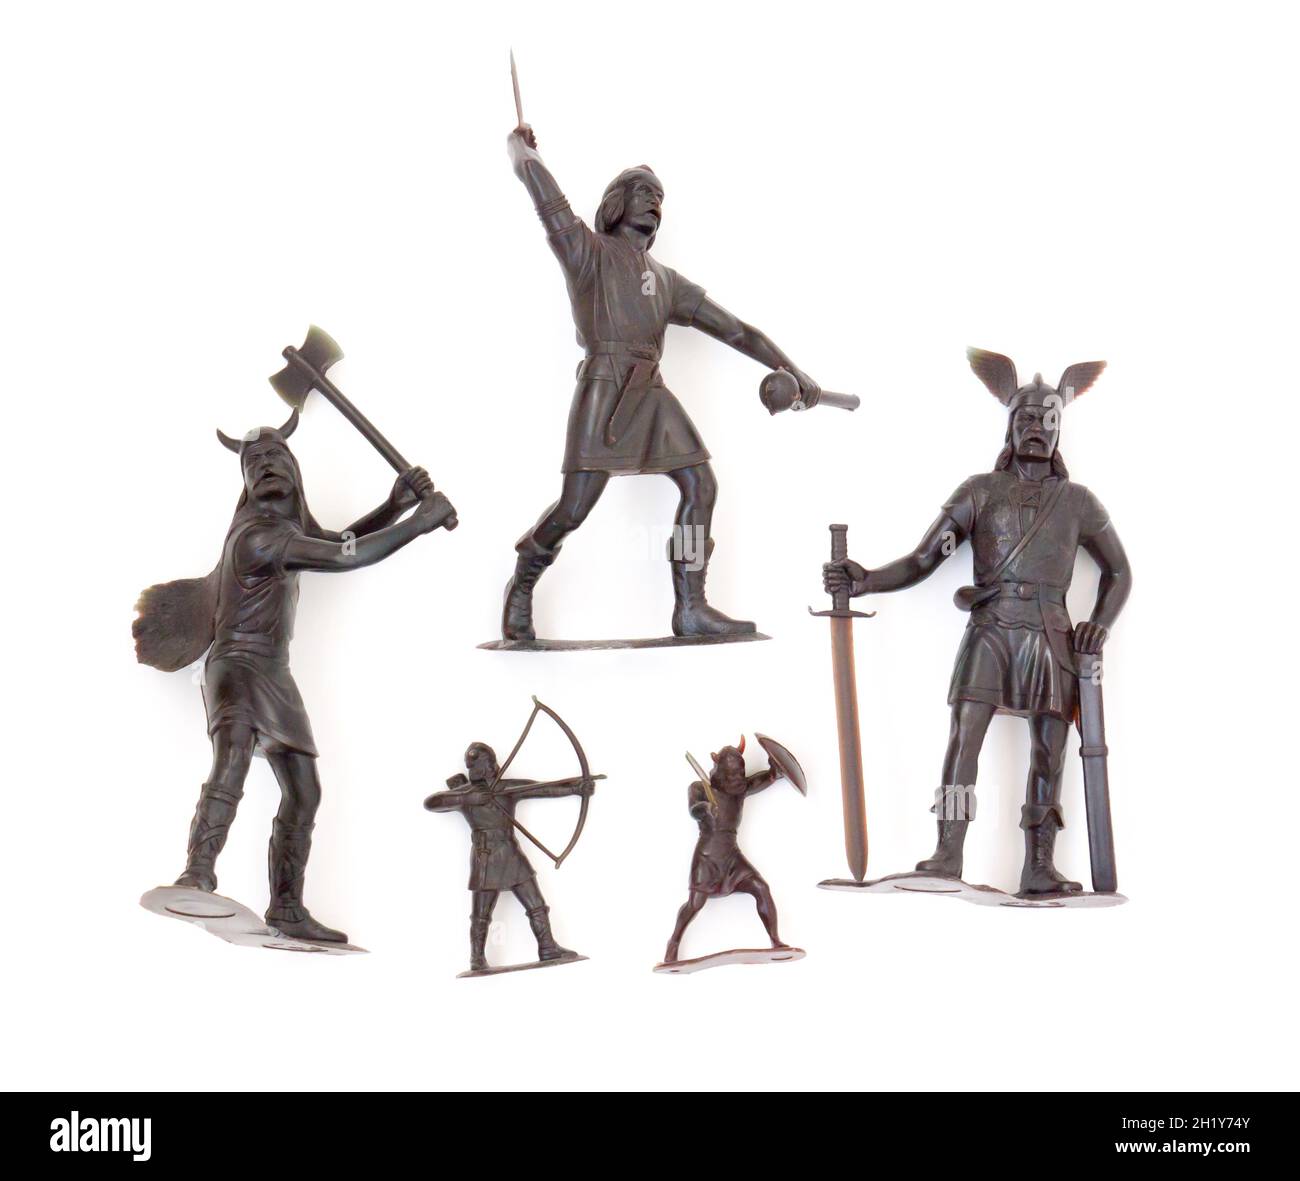 The Miniature isolated toys Vintage Set of 6 Toy Soldiers Vikings. Stock Photo